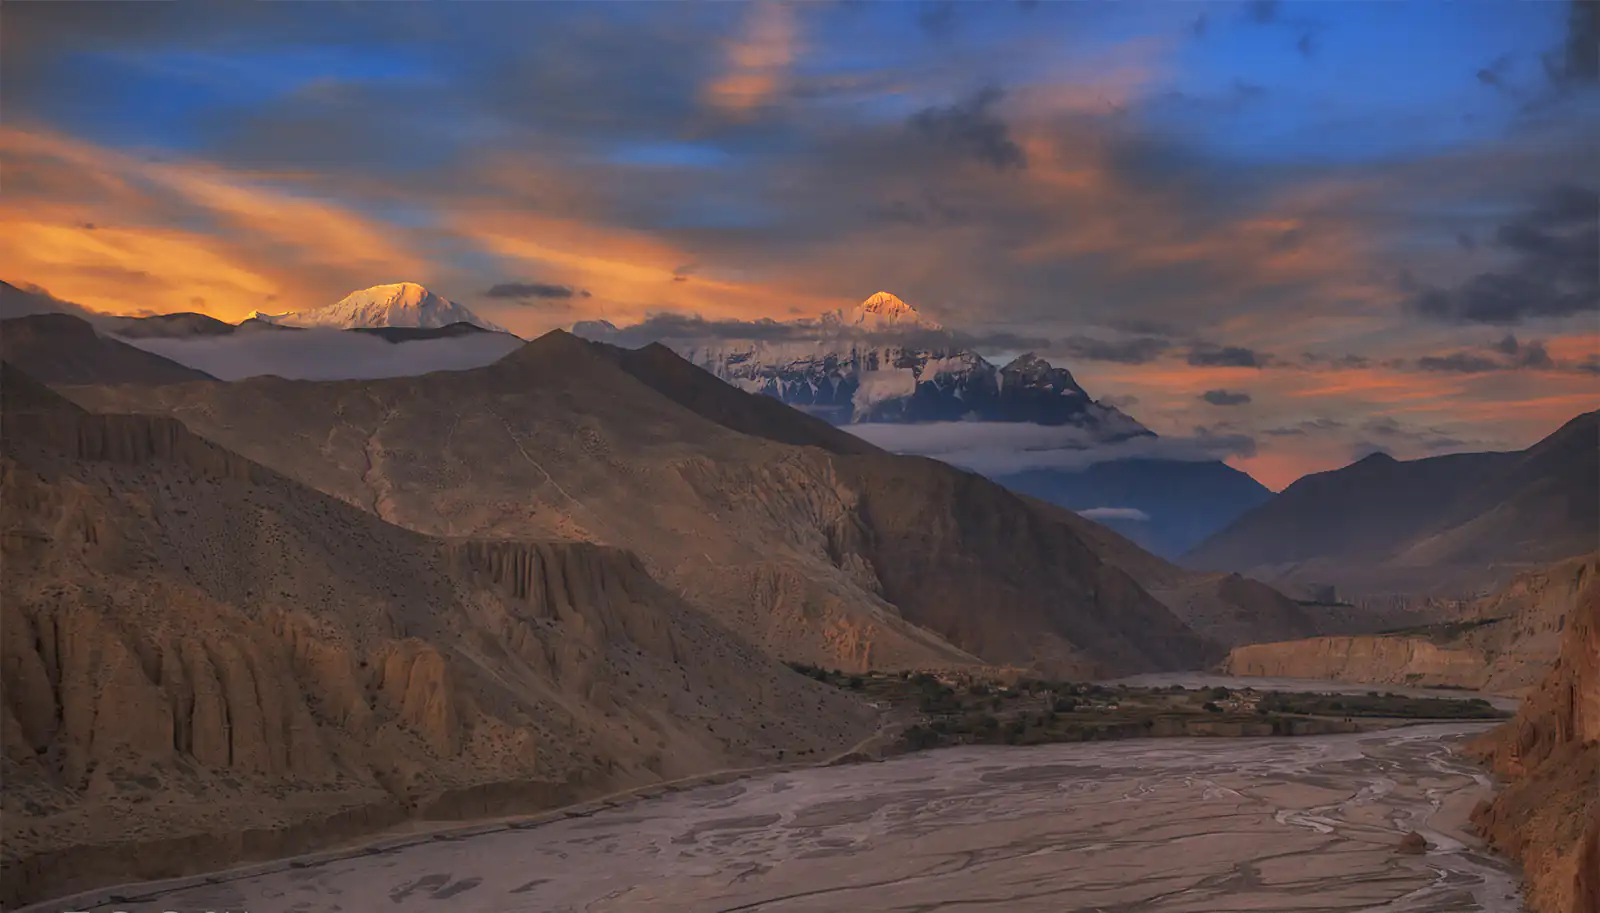 A beautiful sunrise seen from Chaile in Upper mustang Nepal.